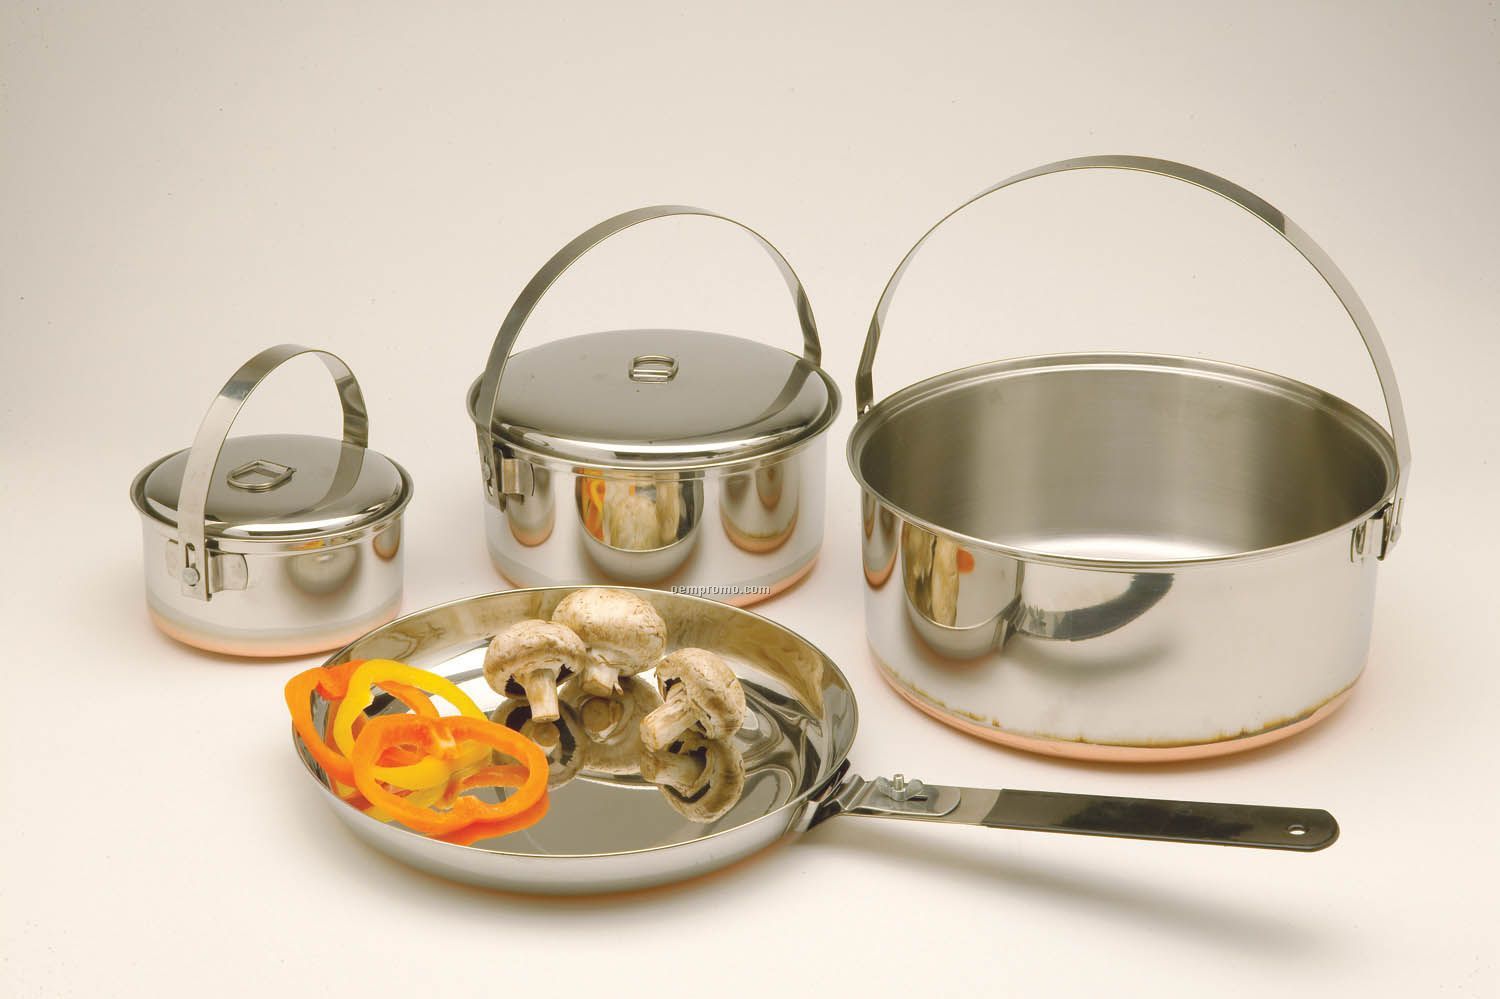 Texsport Family Stainless Steel Cook Set